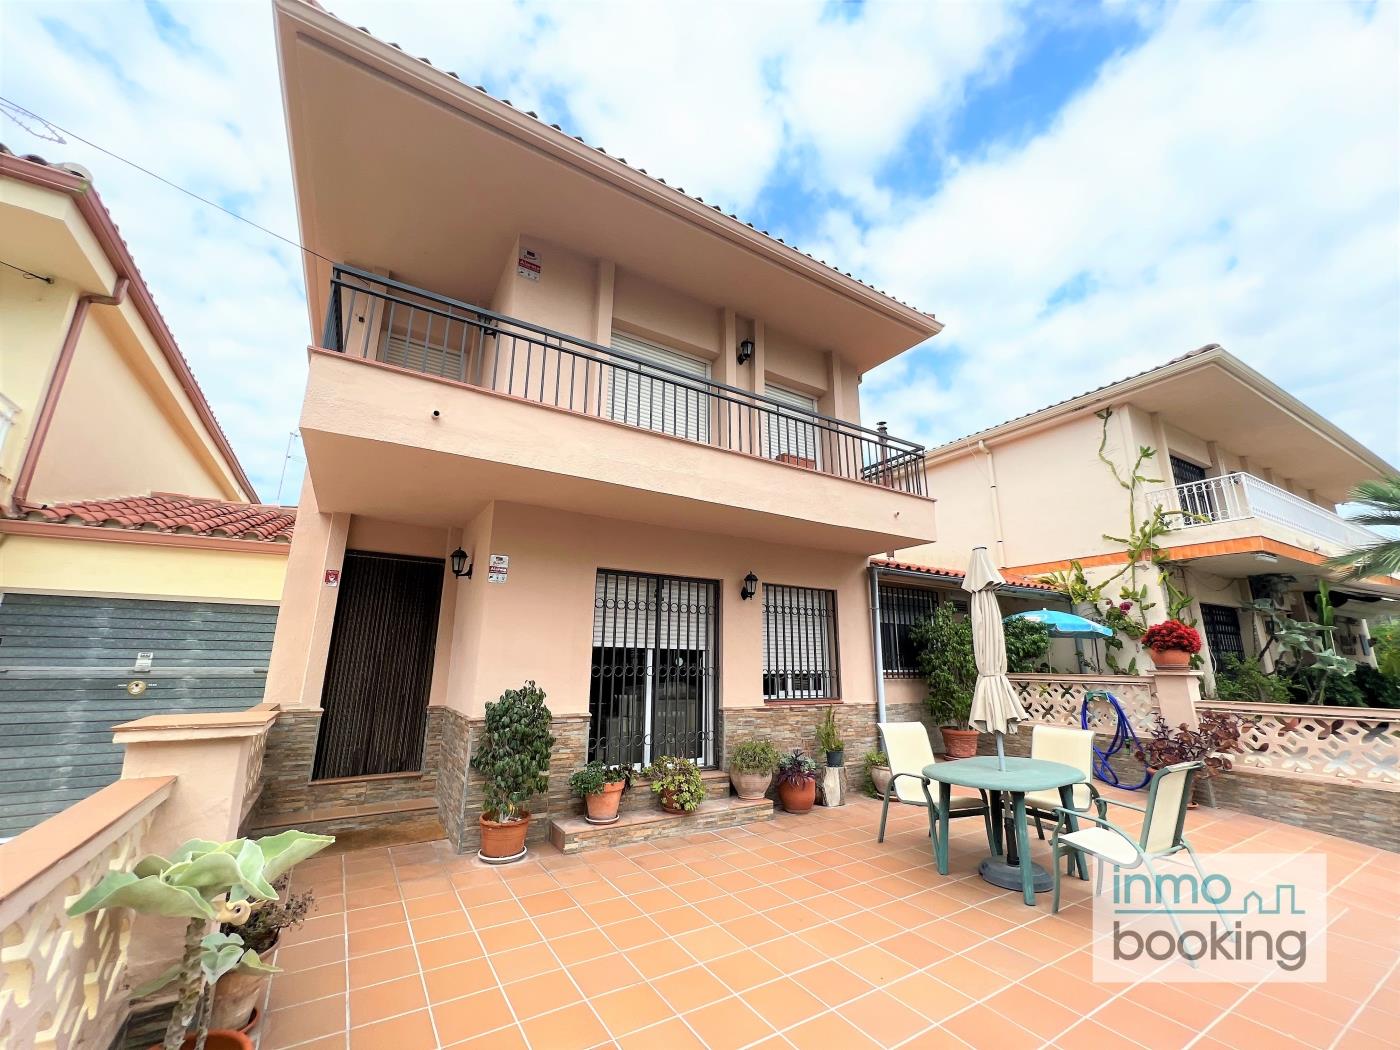 Inmobooking Single-family house Salou, air-conditioned. in salou